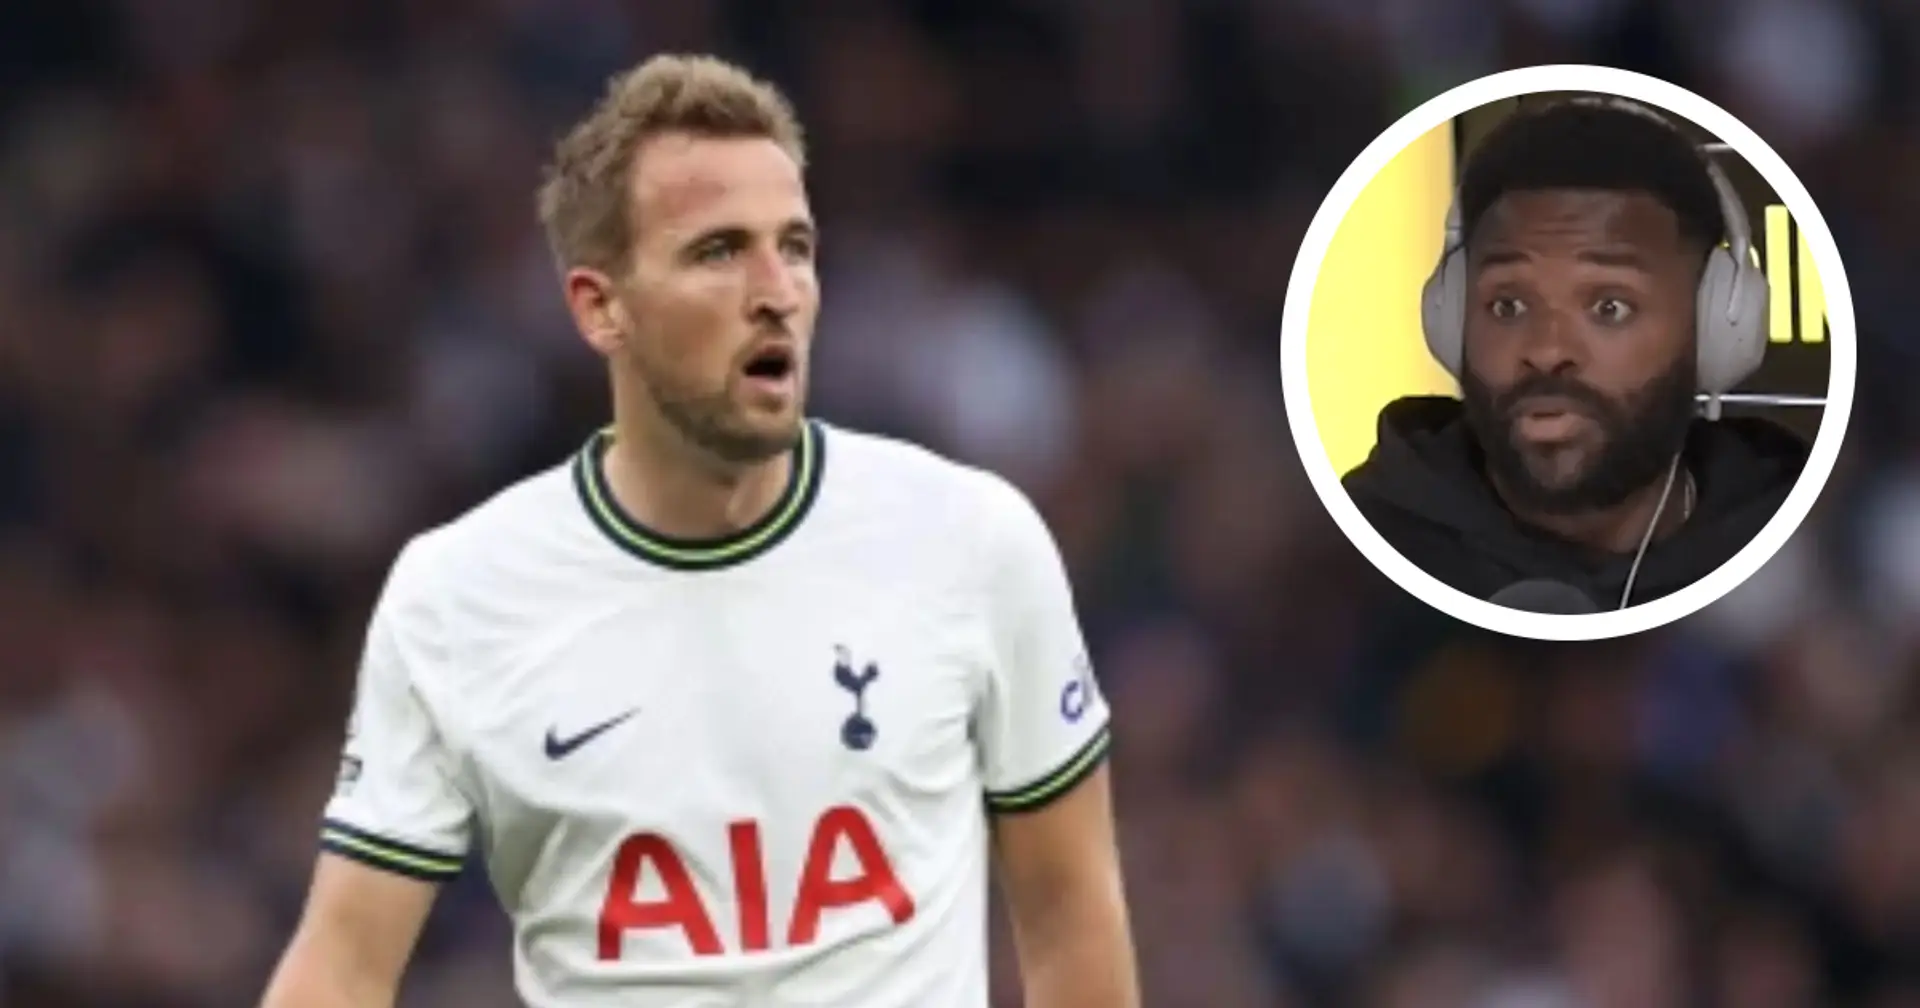 Darren Bent: 'Man United would be perfect for Harry Kane'